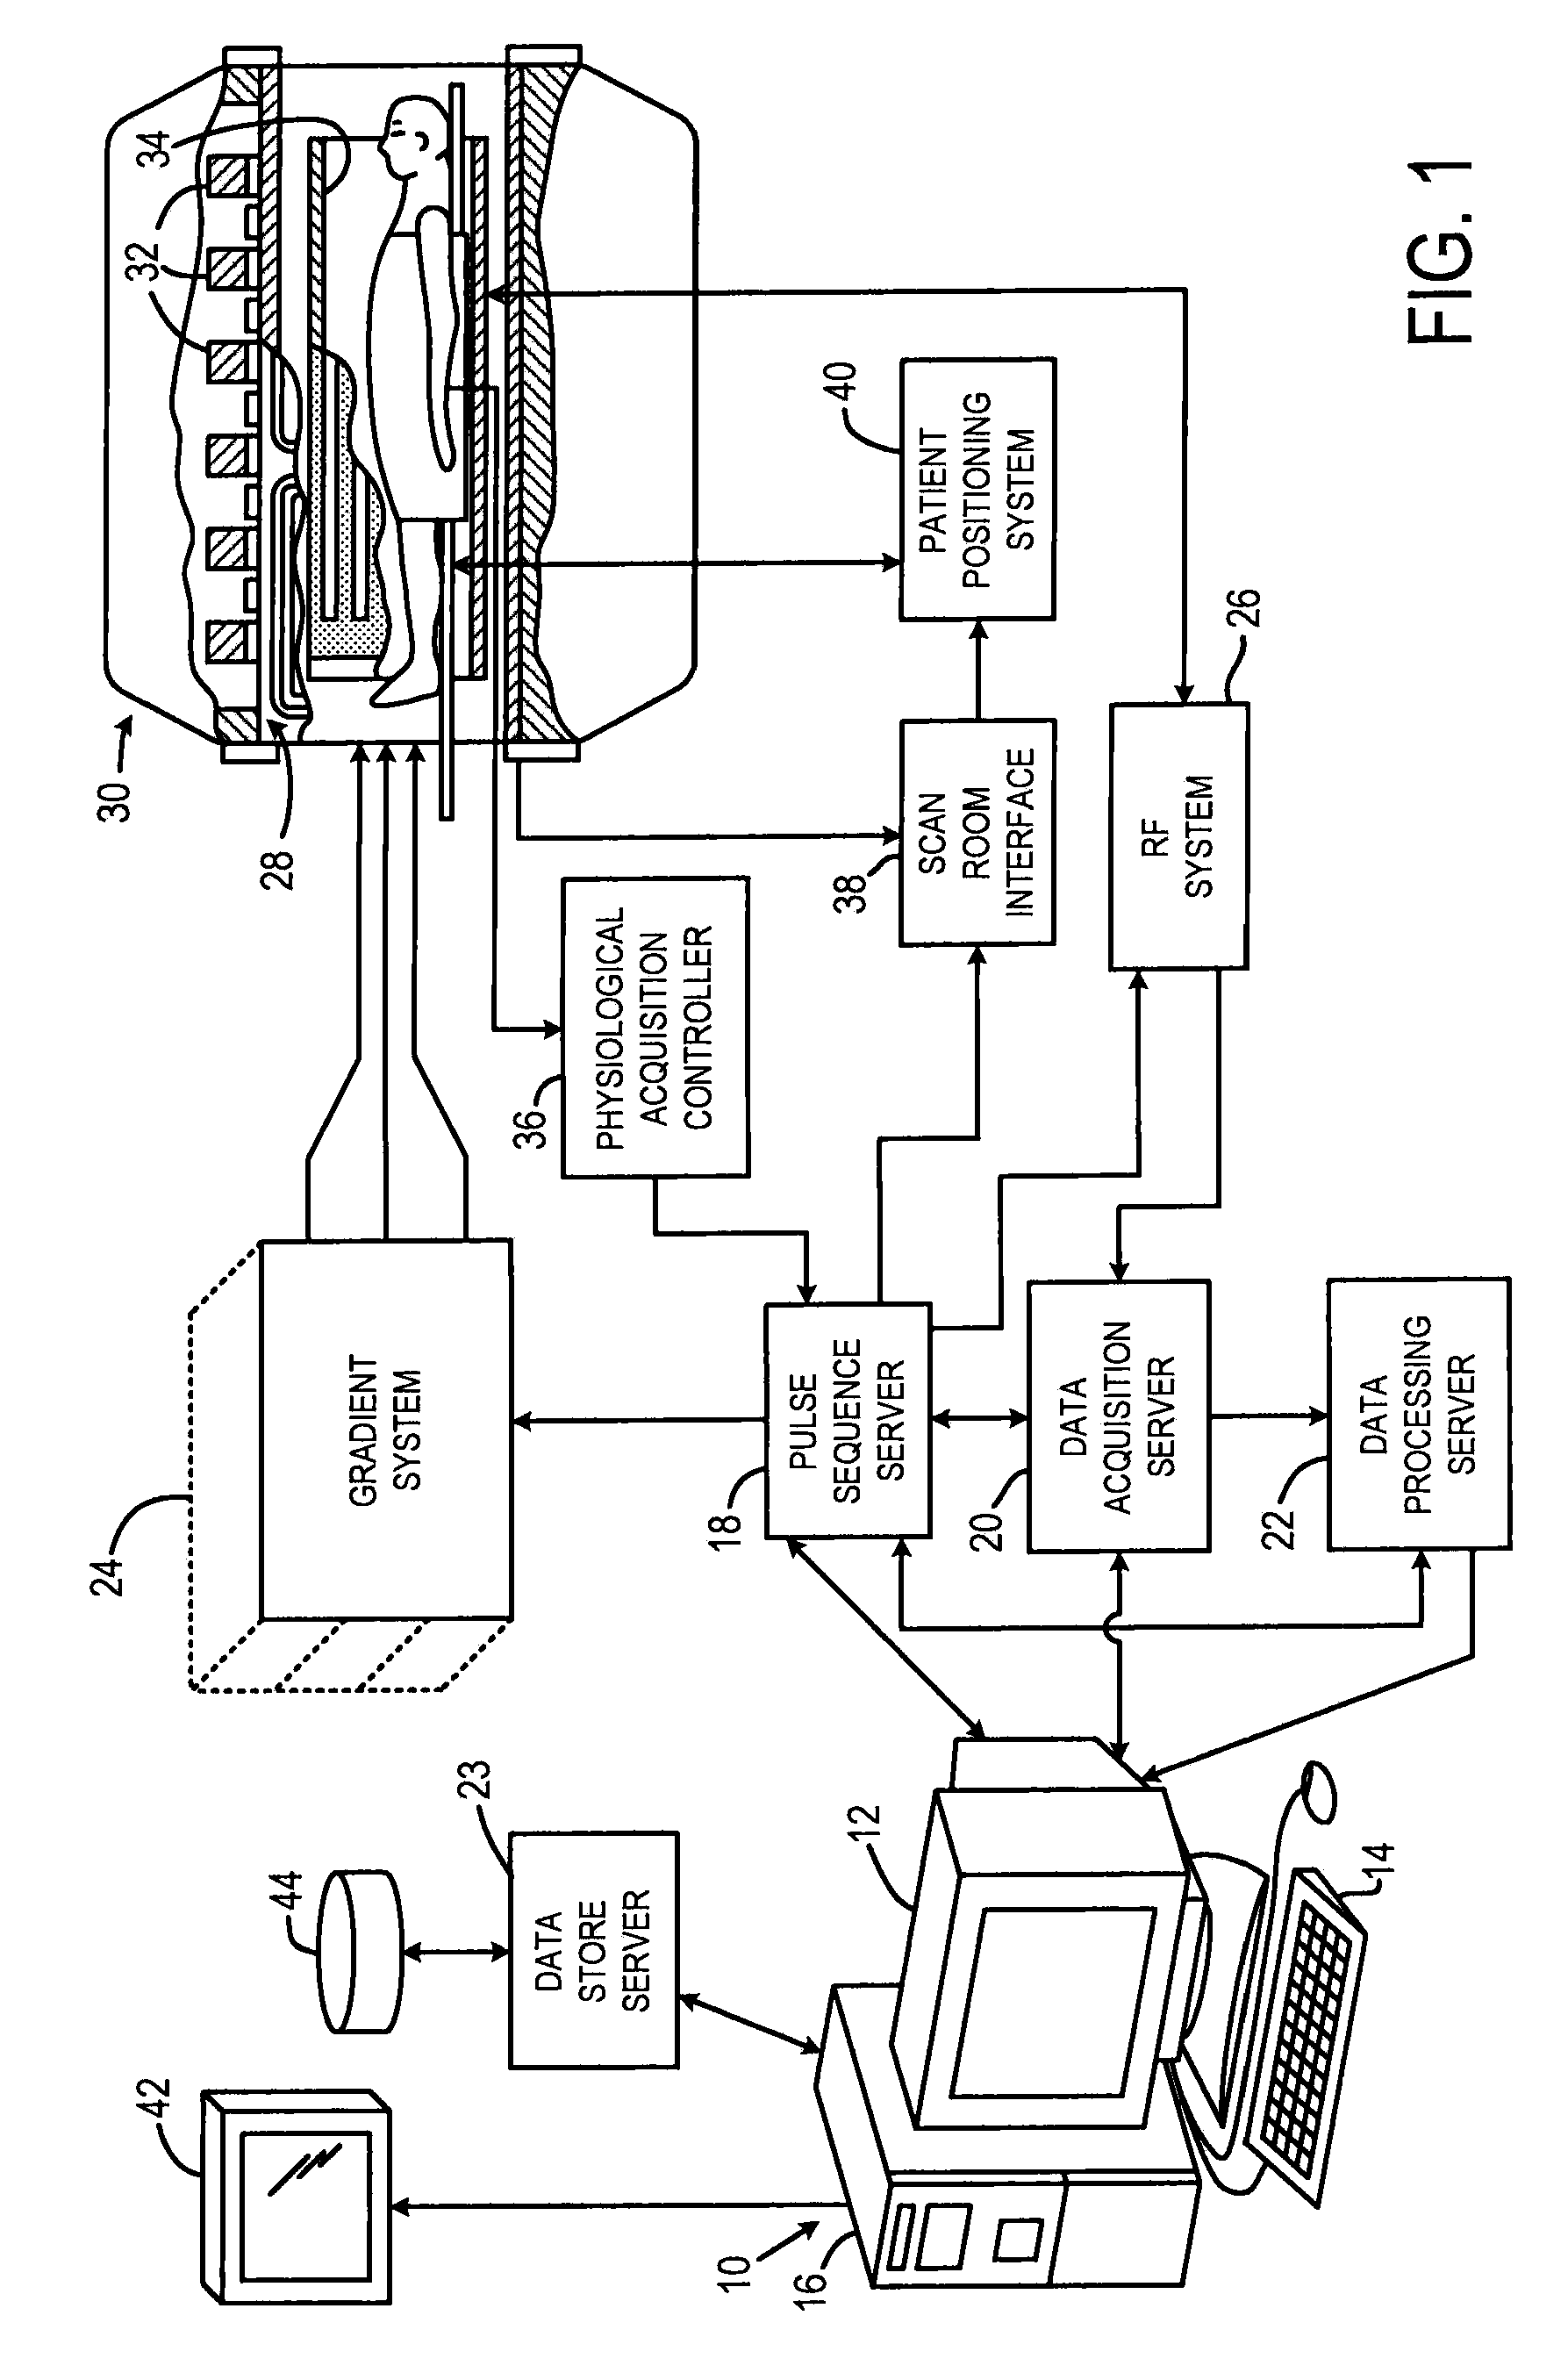 System and method to analyze blood parameters using magnetic resonance imaging